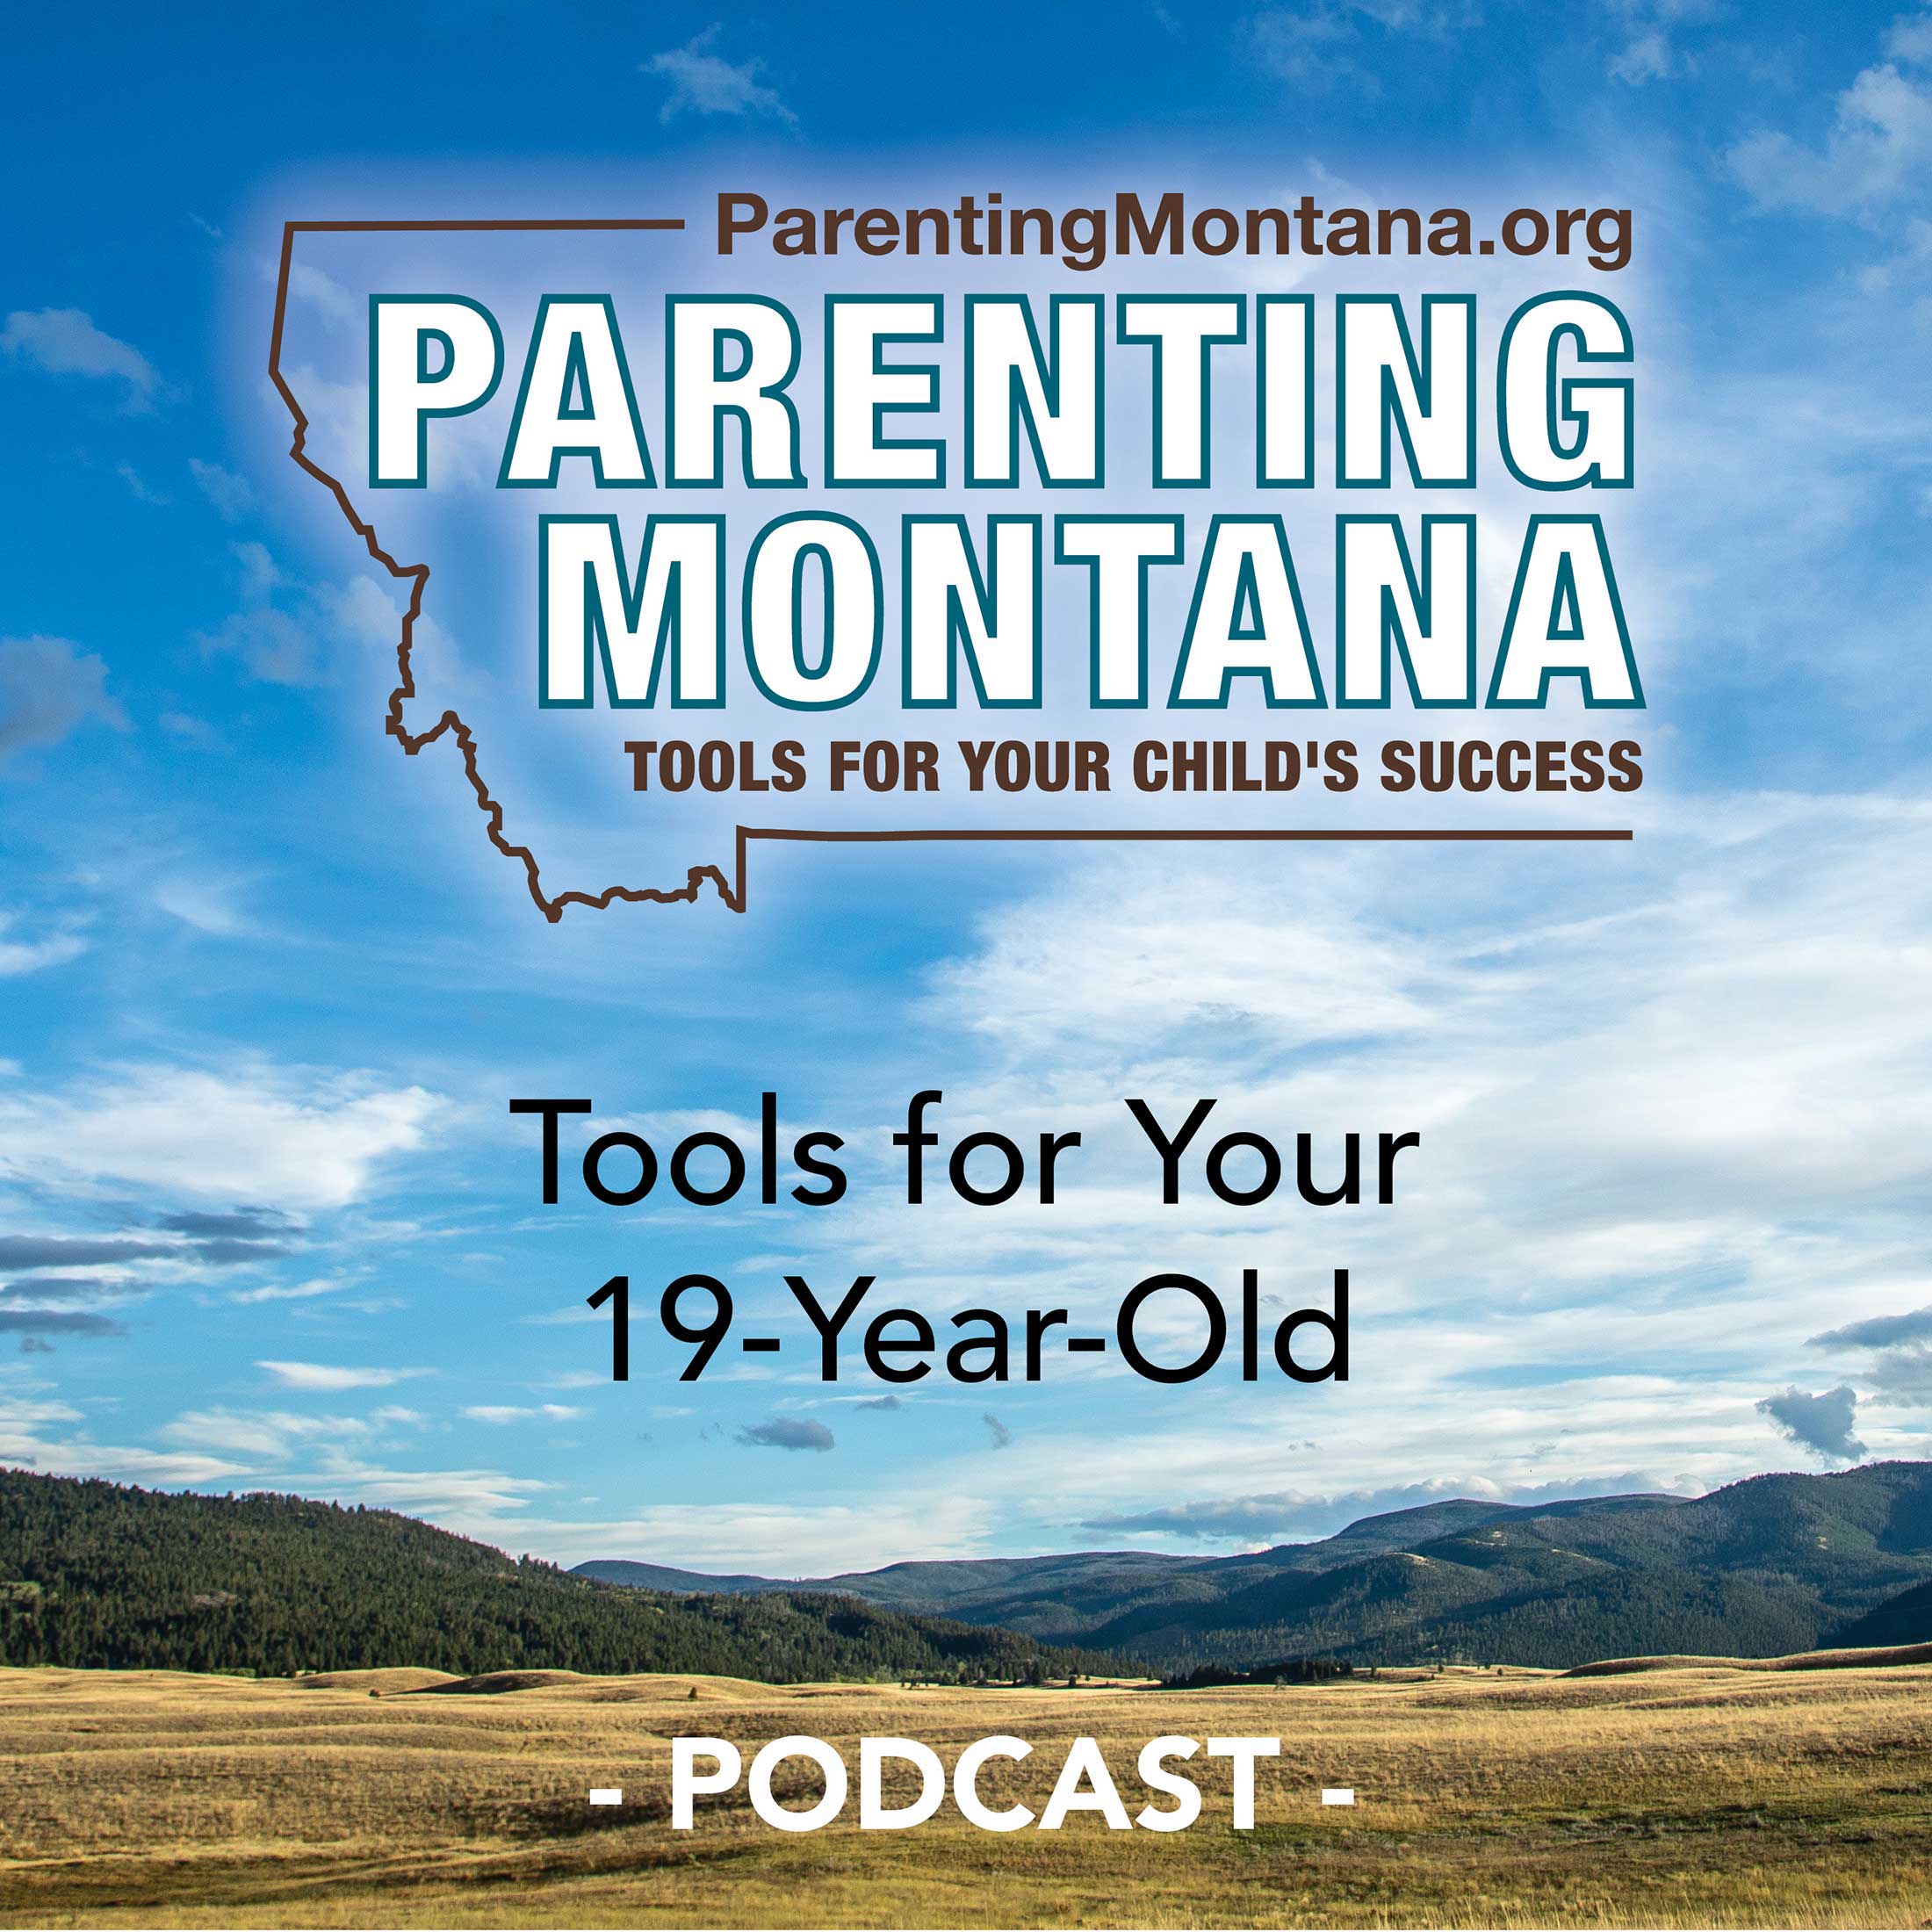 Artwork for podcast 19-Year-Old Parenting Montana Tools